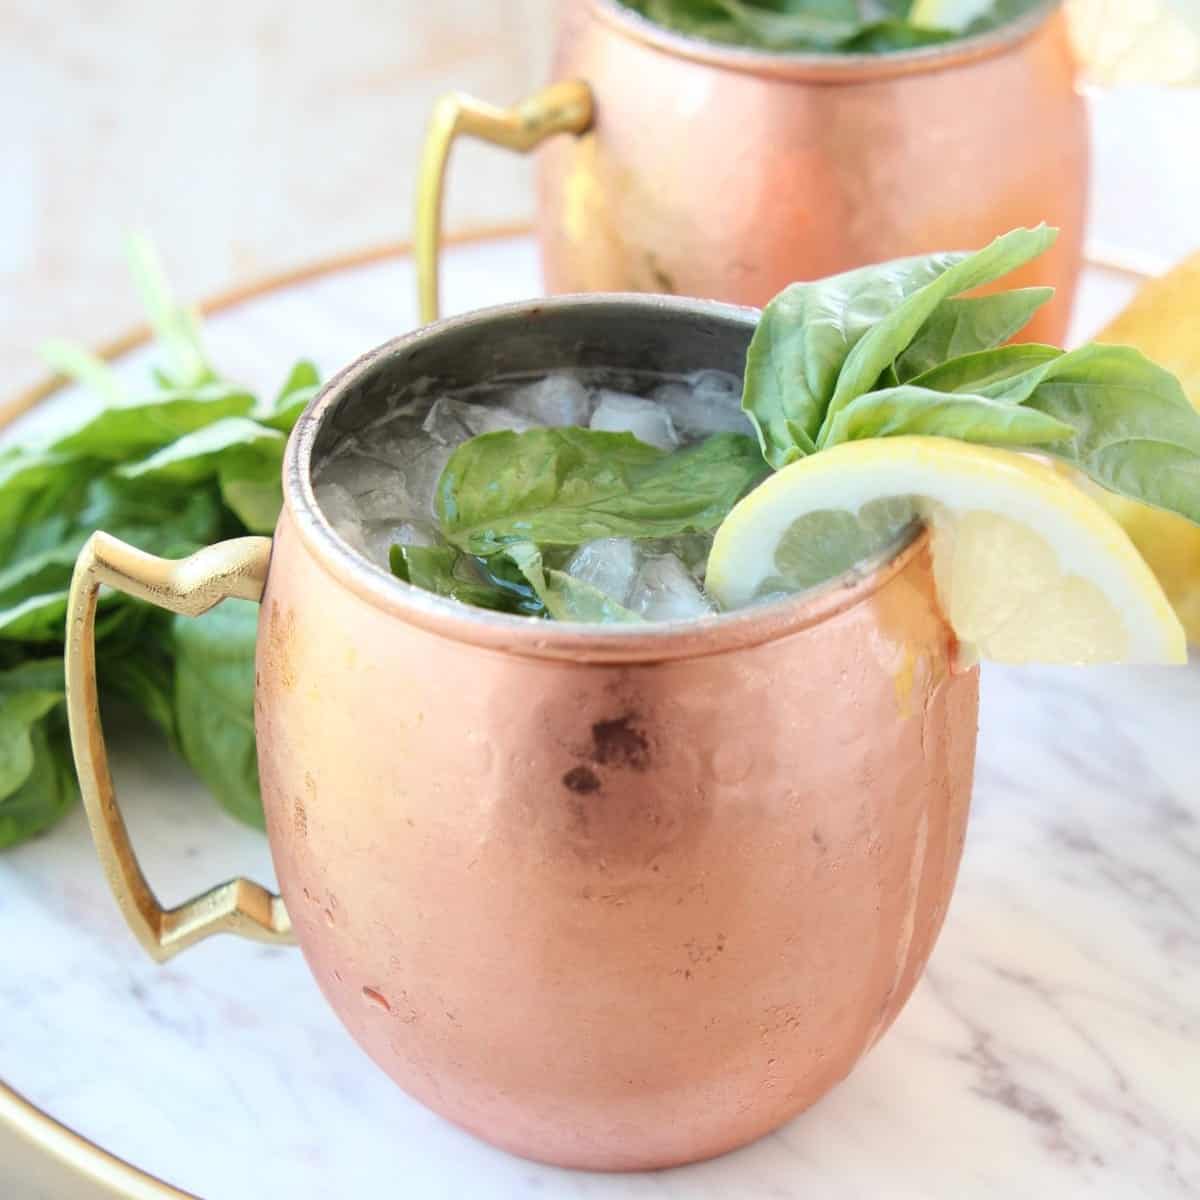 Moscow Mule recipe, In 3 steps